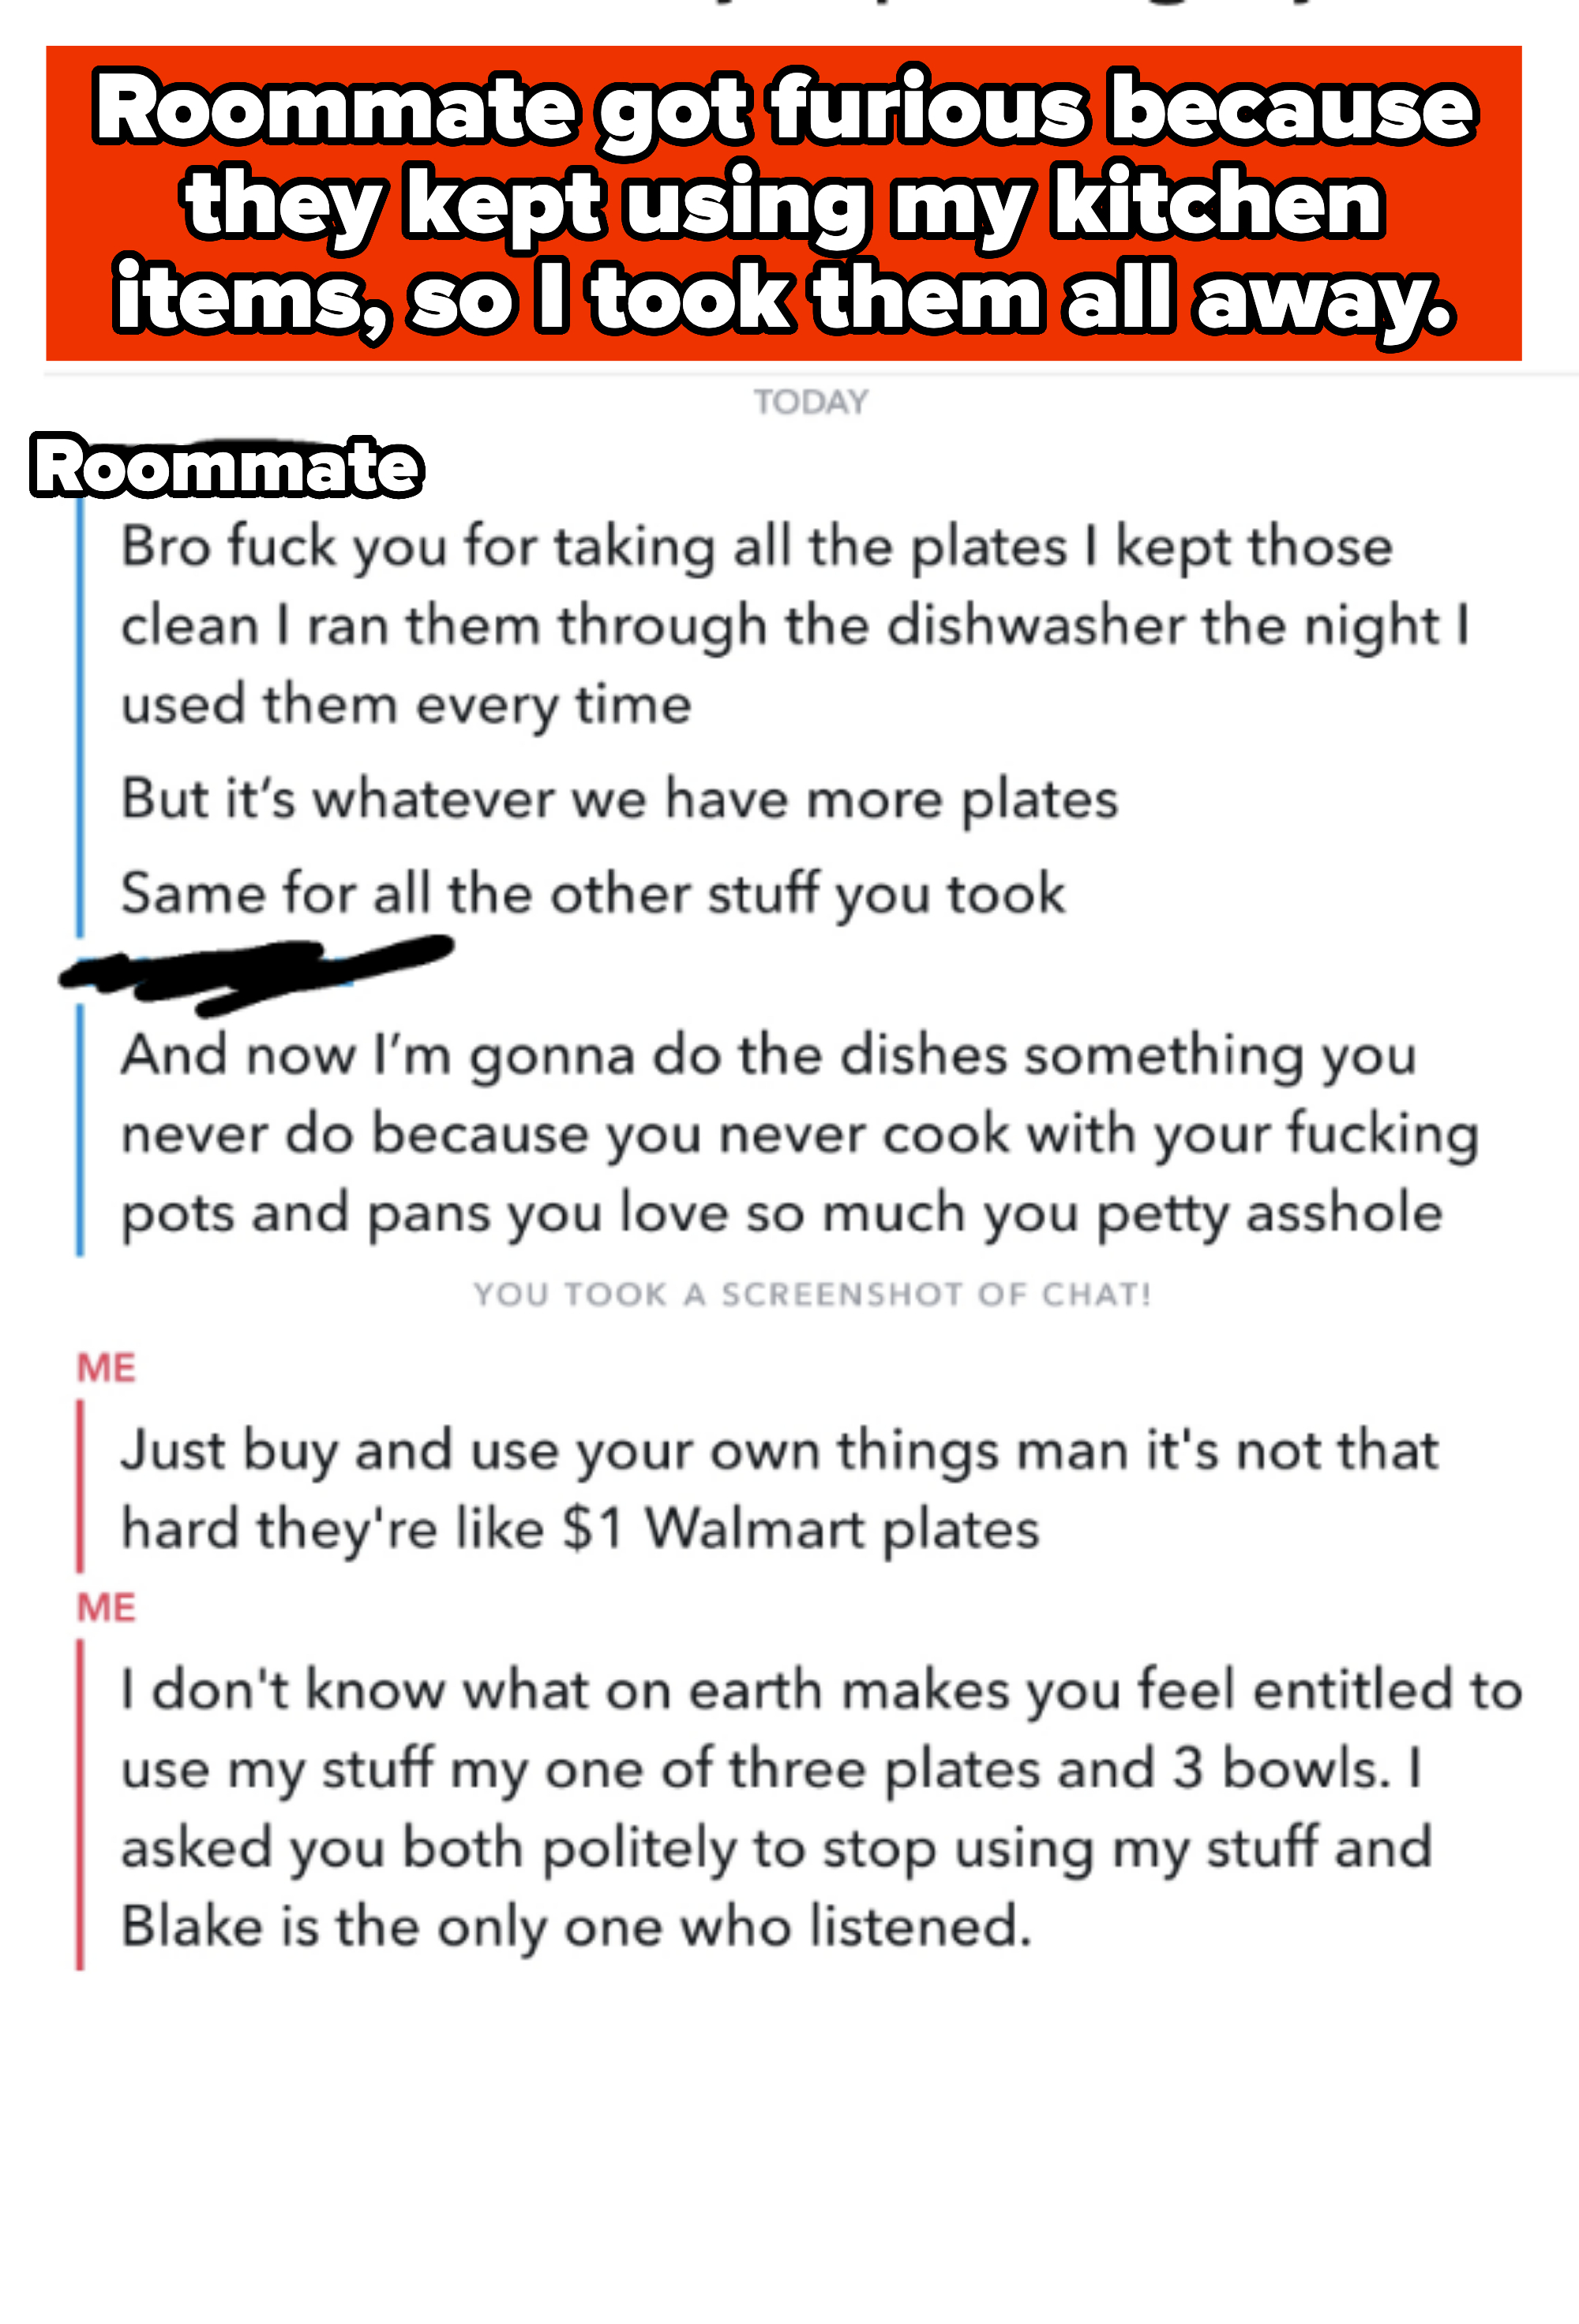 messages about dishes and buying plates